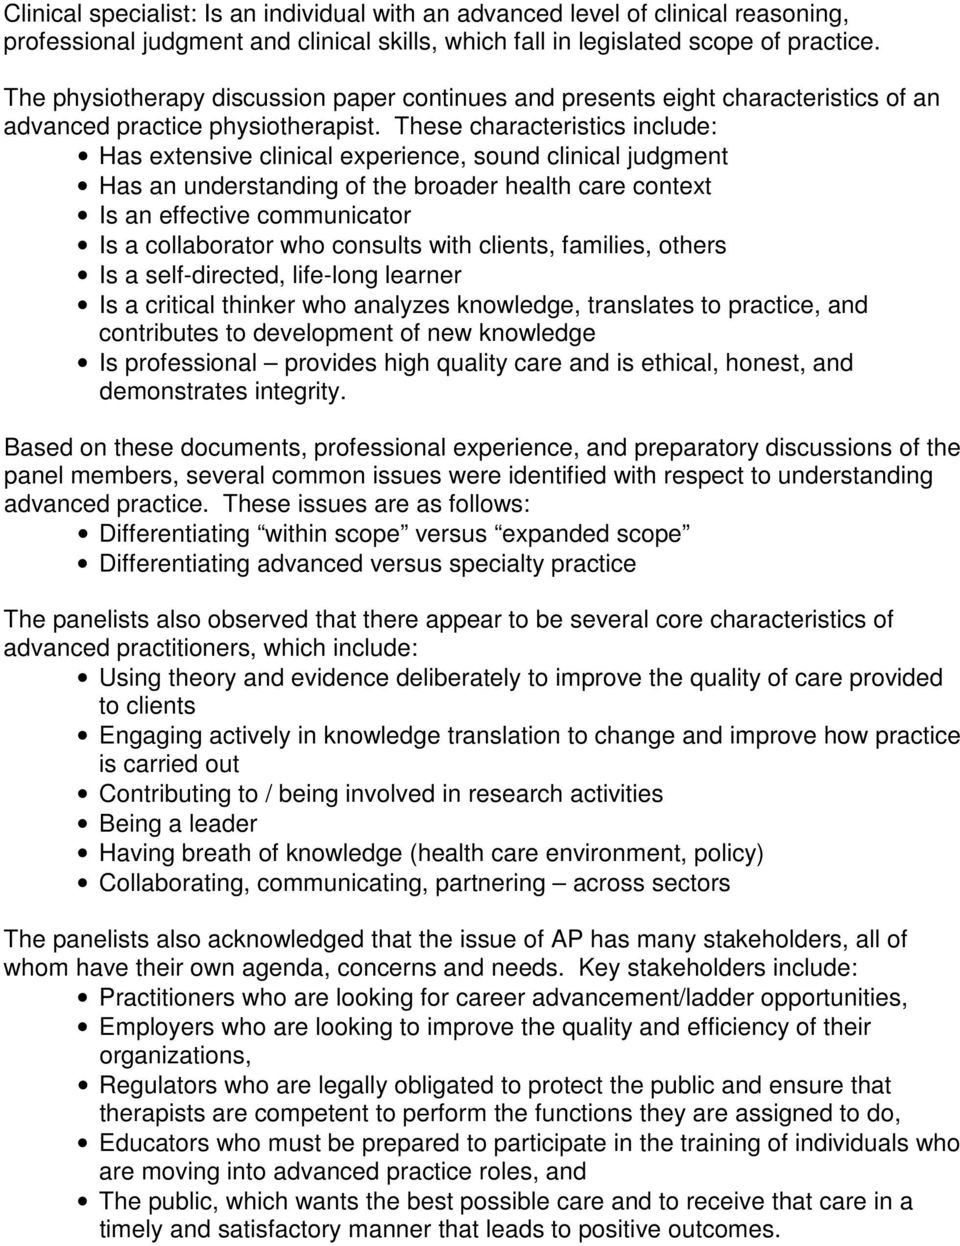 These characteristics include: Has extensive clinical experience, sound clinical judgment Has an understanding of the broader health care context Is an effective communicator Is a collaborator who